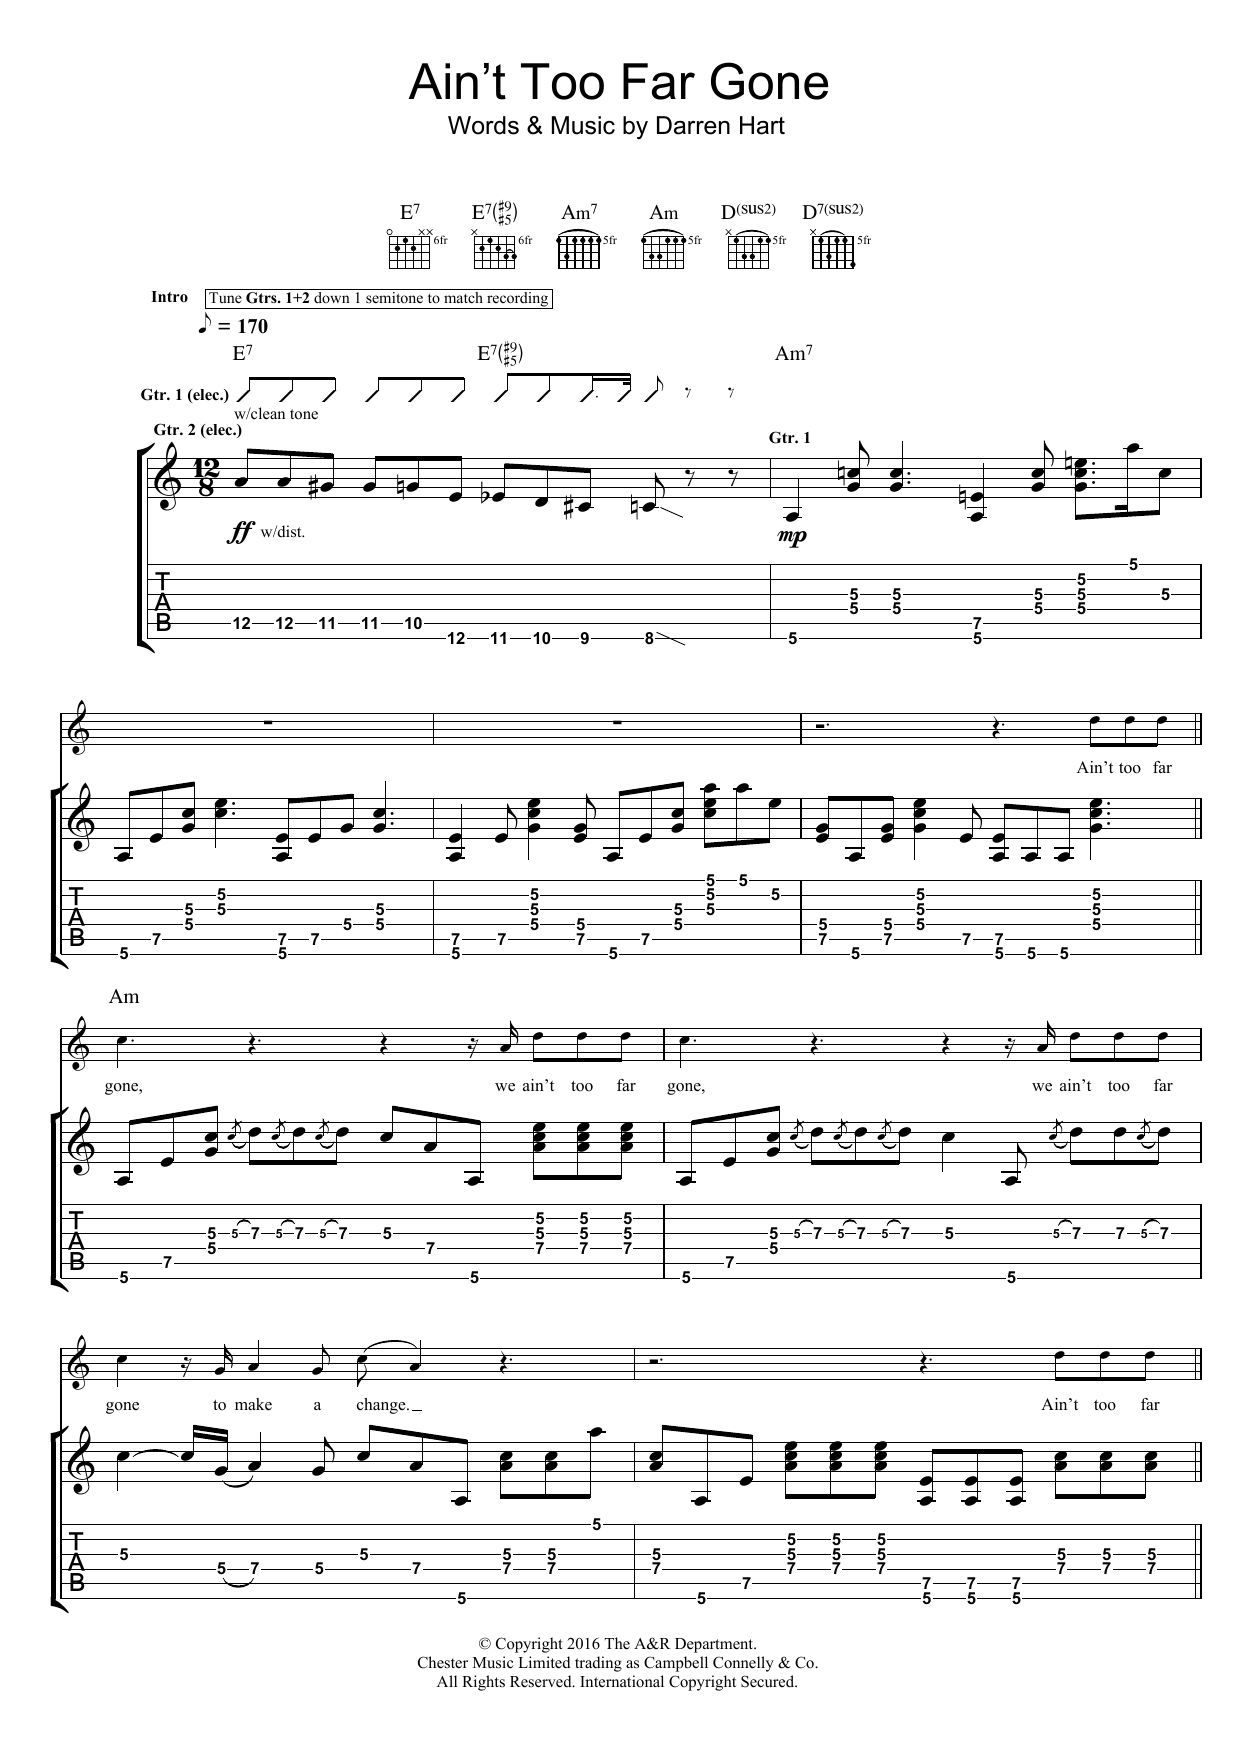 Download Harts Ain't Too Far Gone Sheet Music